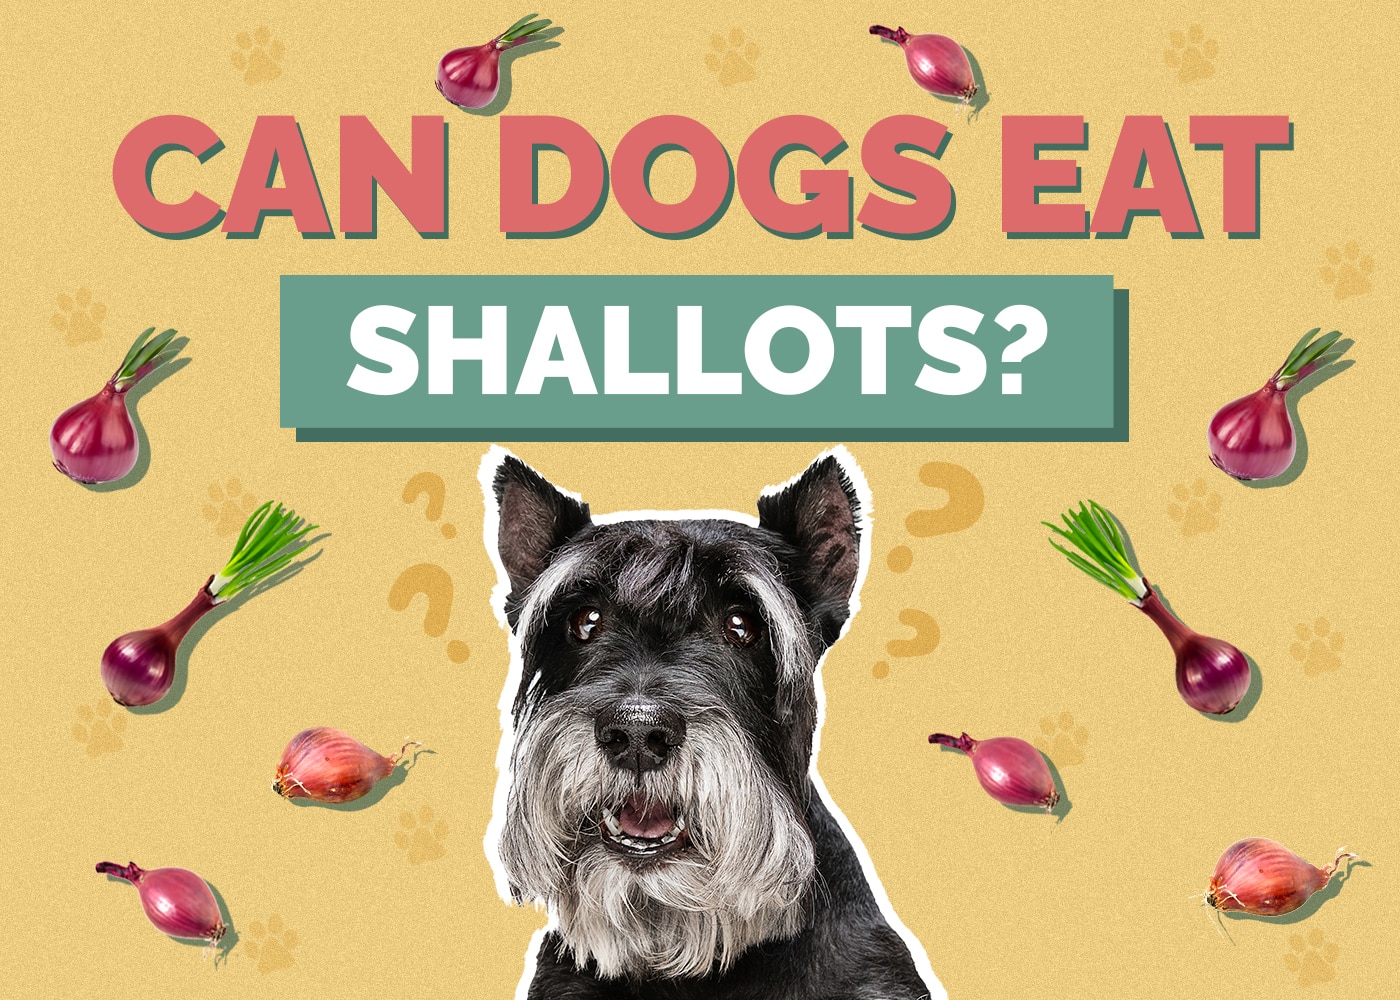 Can Dogs Eat Shallots